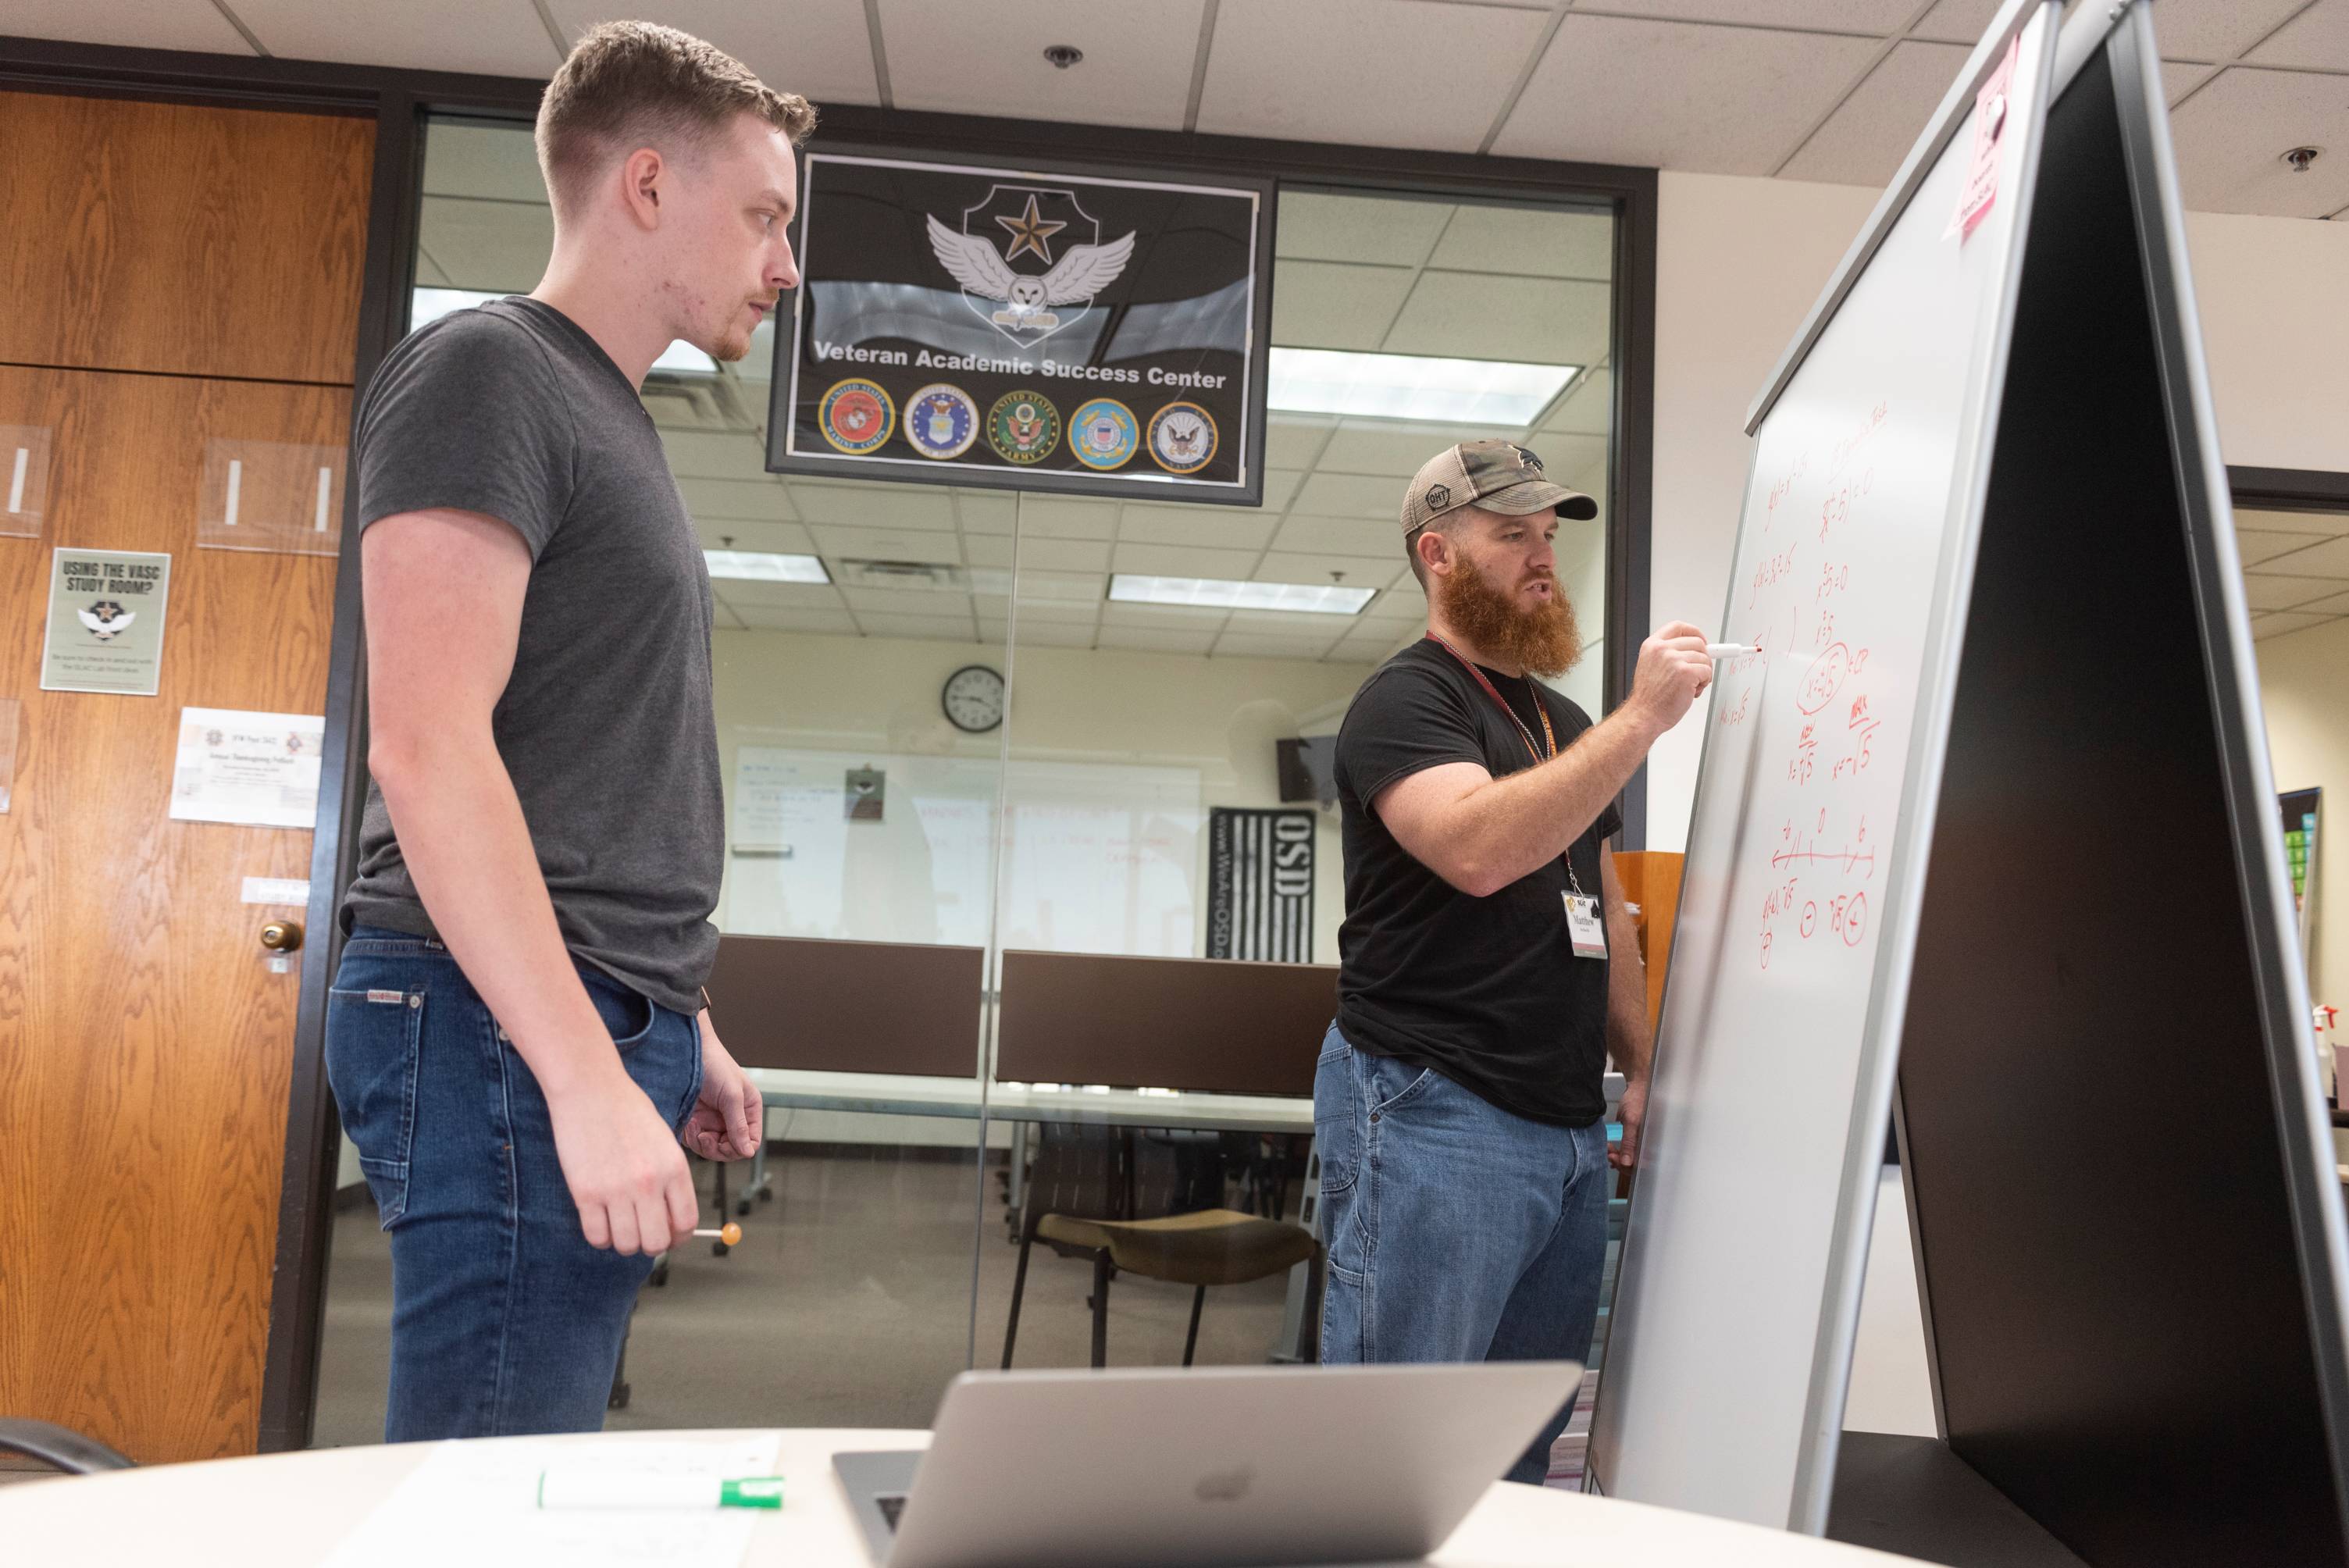 two students stand in front of a sign that says Veteran Academic Success Center. one student is writing on a dry erase board while the other observes.